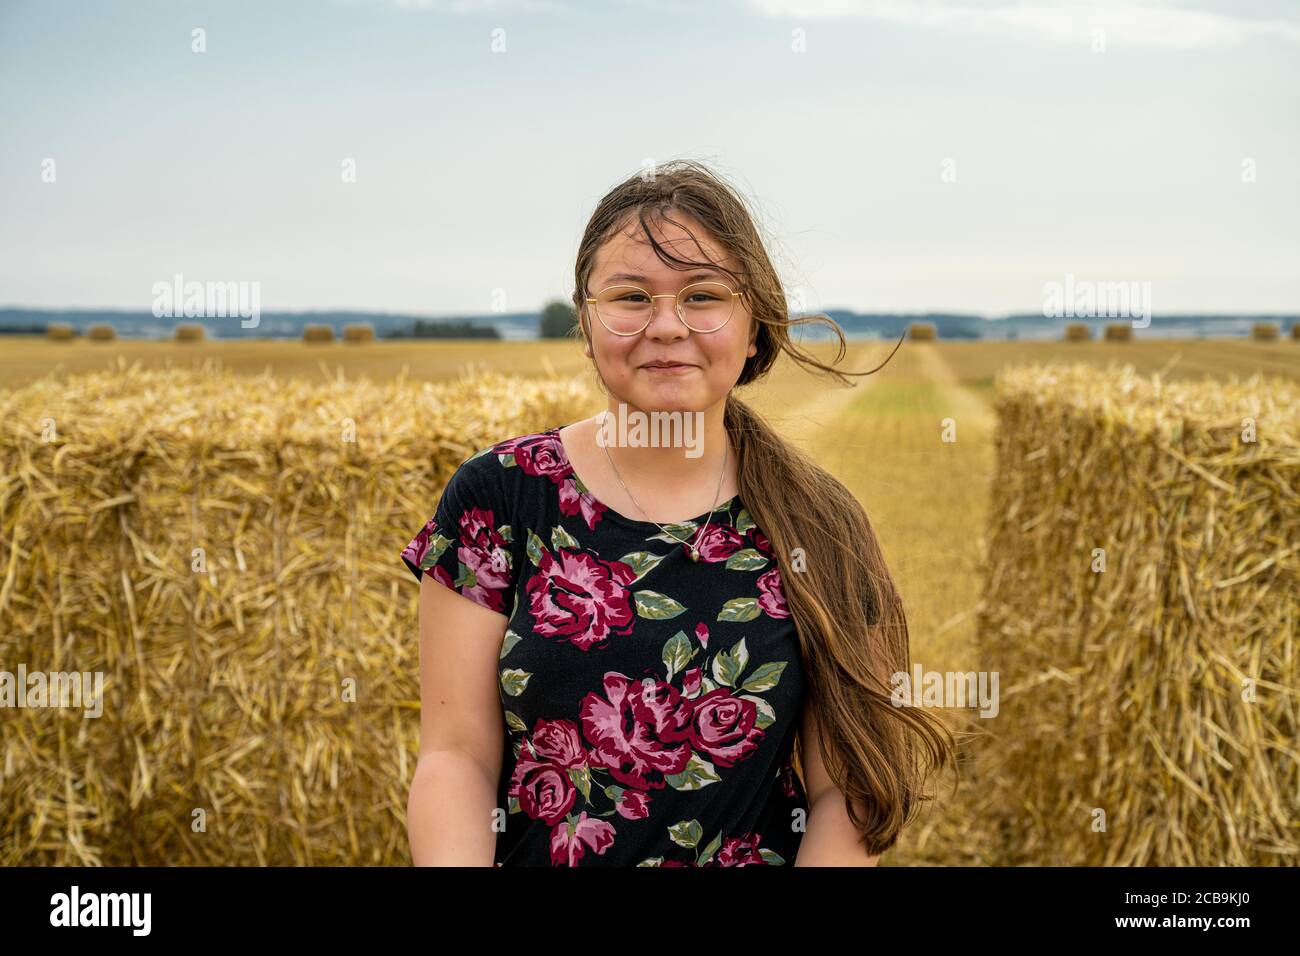 A preteen girl with long brown hair faces the camera and smiles. Bales of straw in a newly harvested field in the background Stock Photo